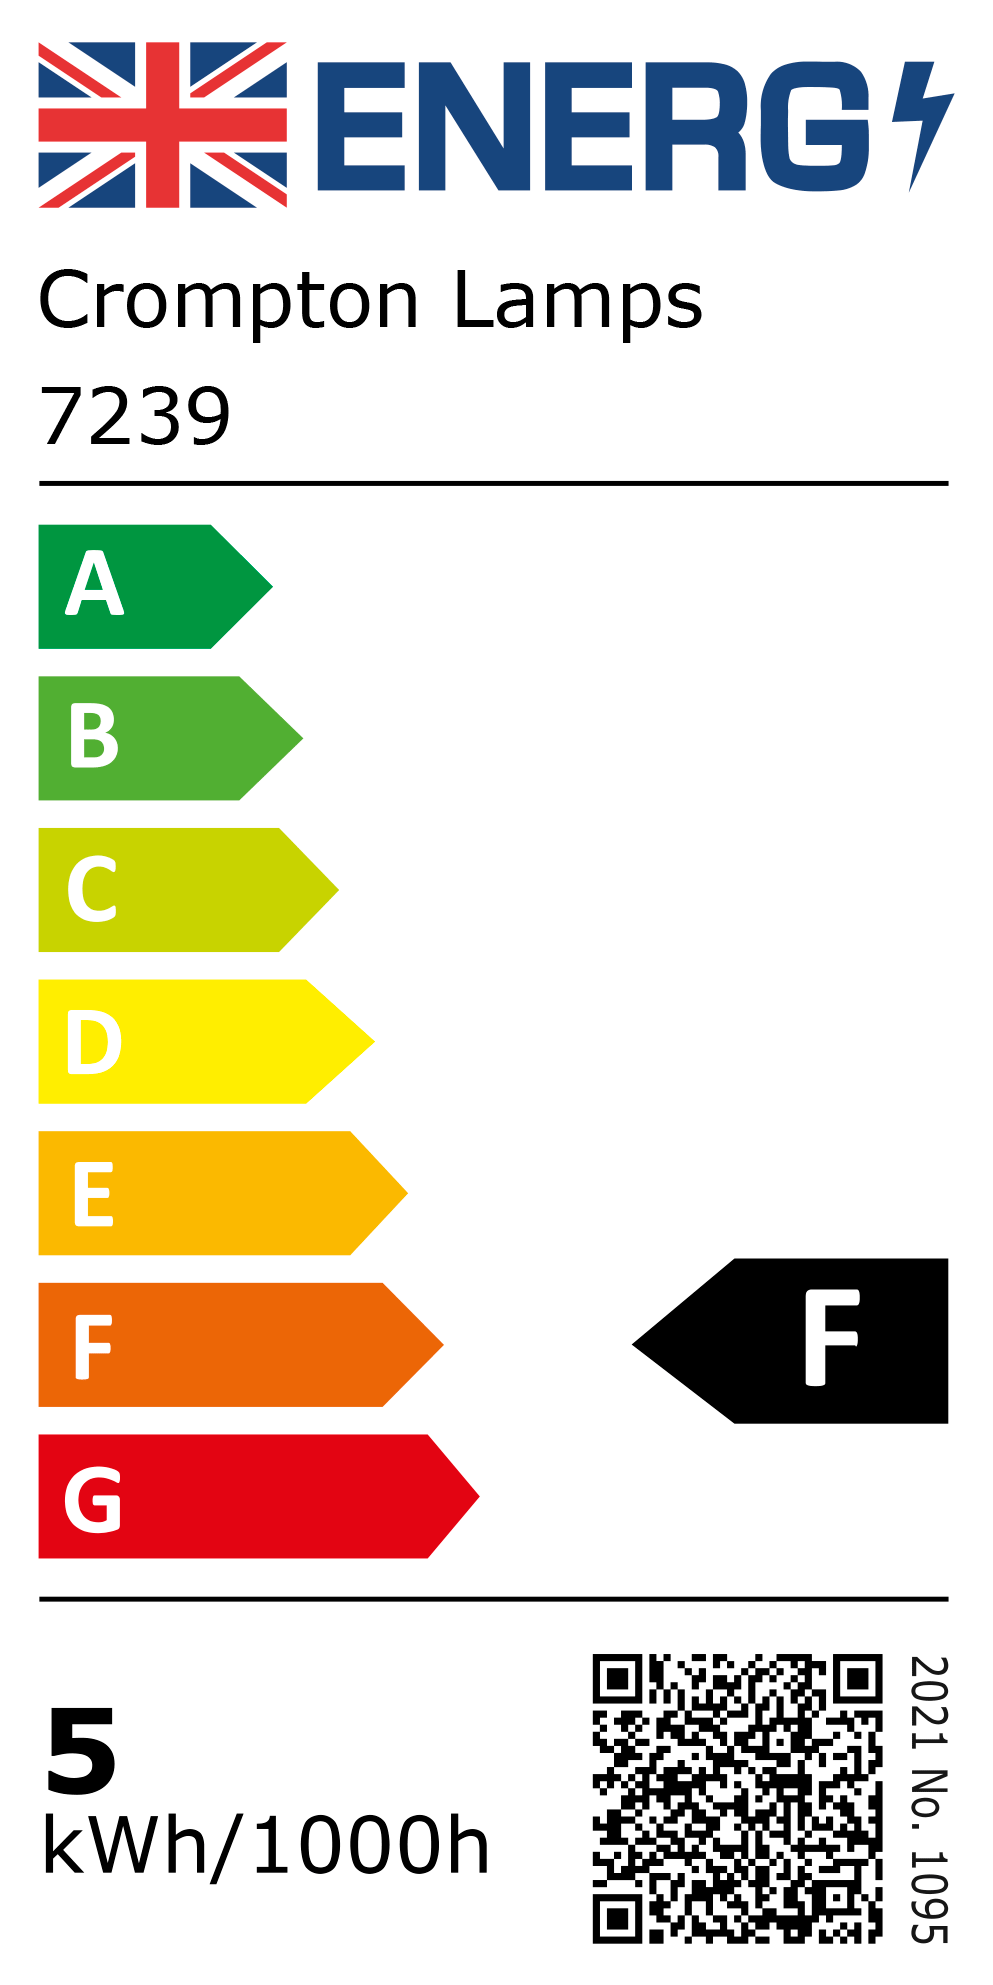 New 2021 Energy Rating Label: Stock Code 7239